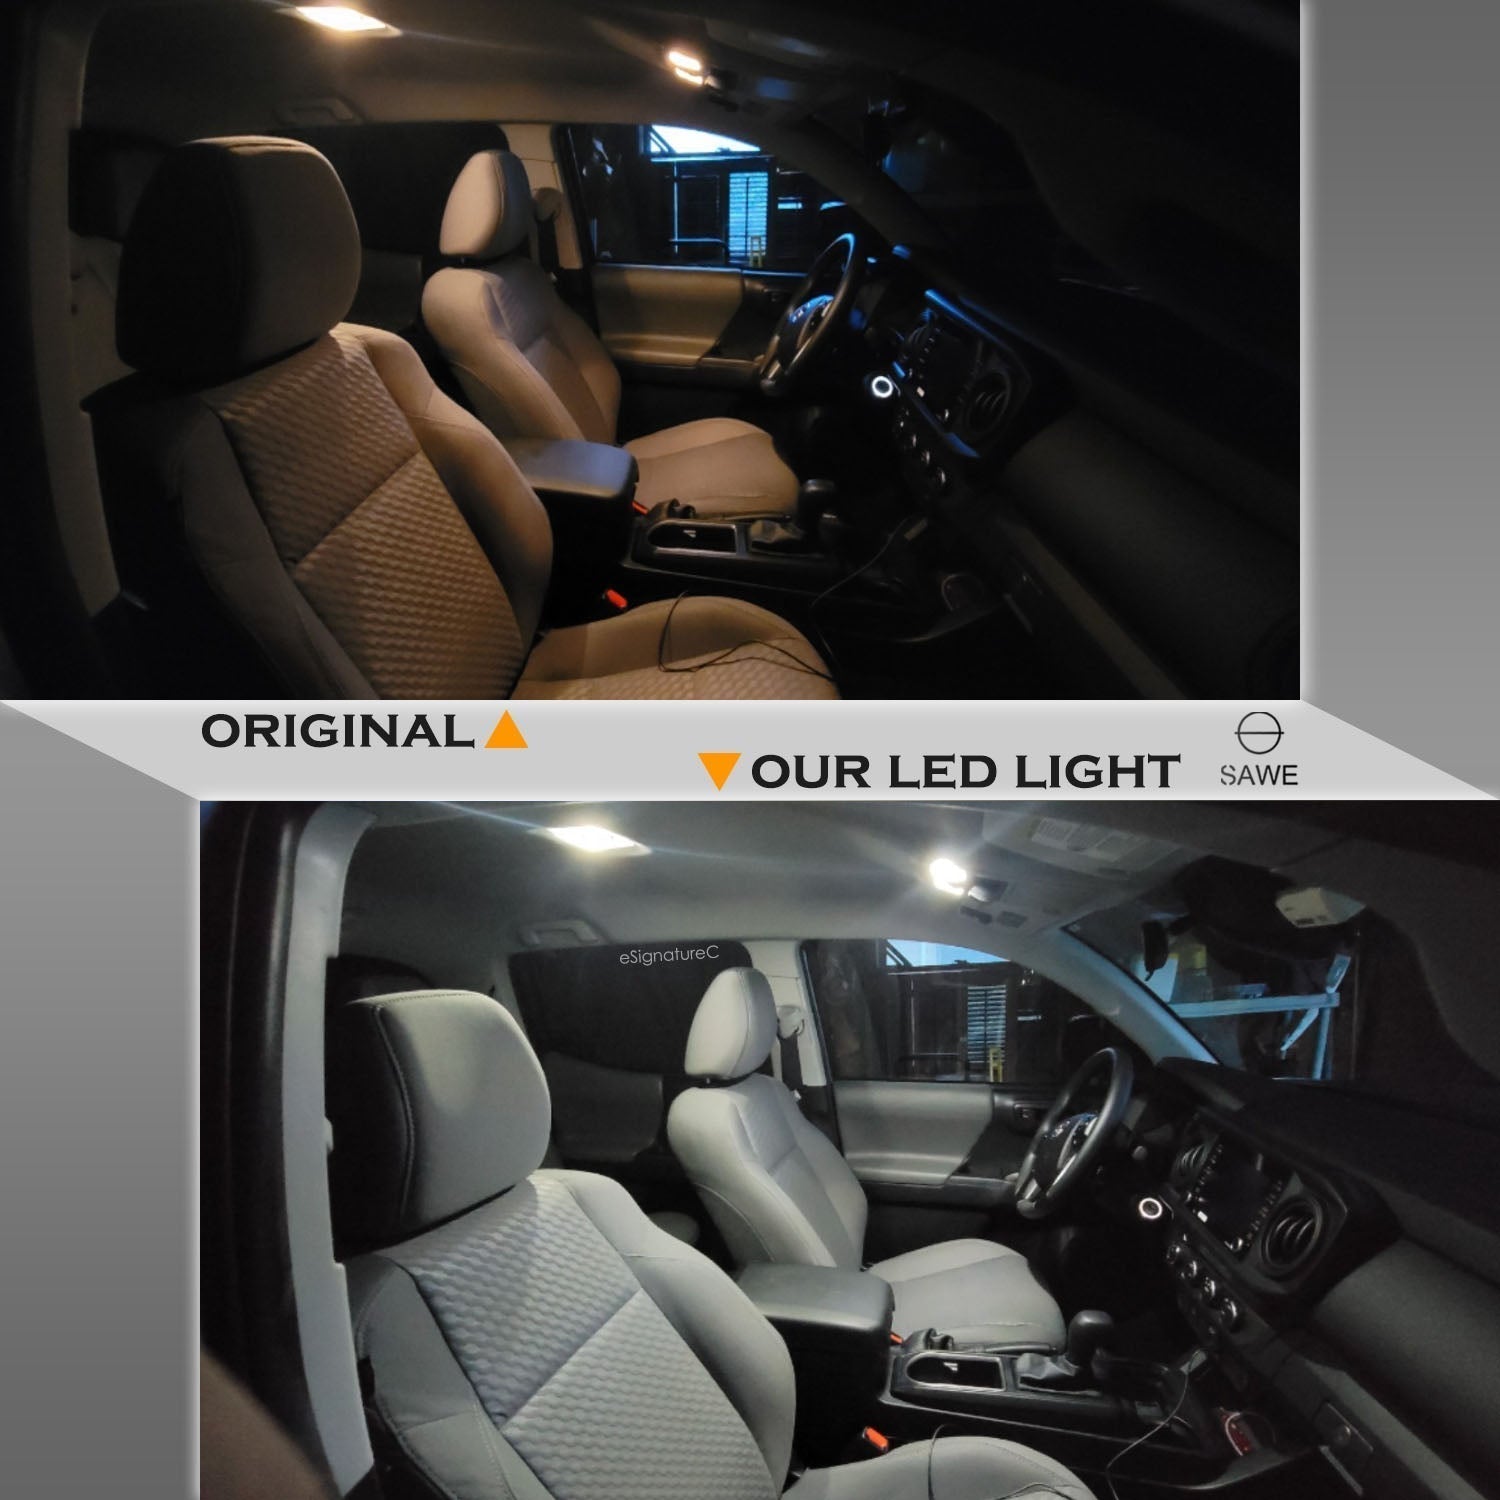 For Nissan Quest Interior LED Lights - Dome & Map Light Bulbs Package Kit for 2004 - 2009 - White